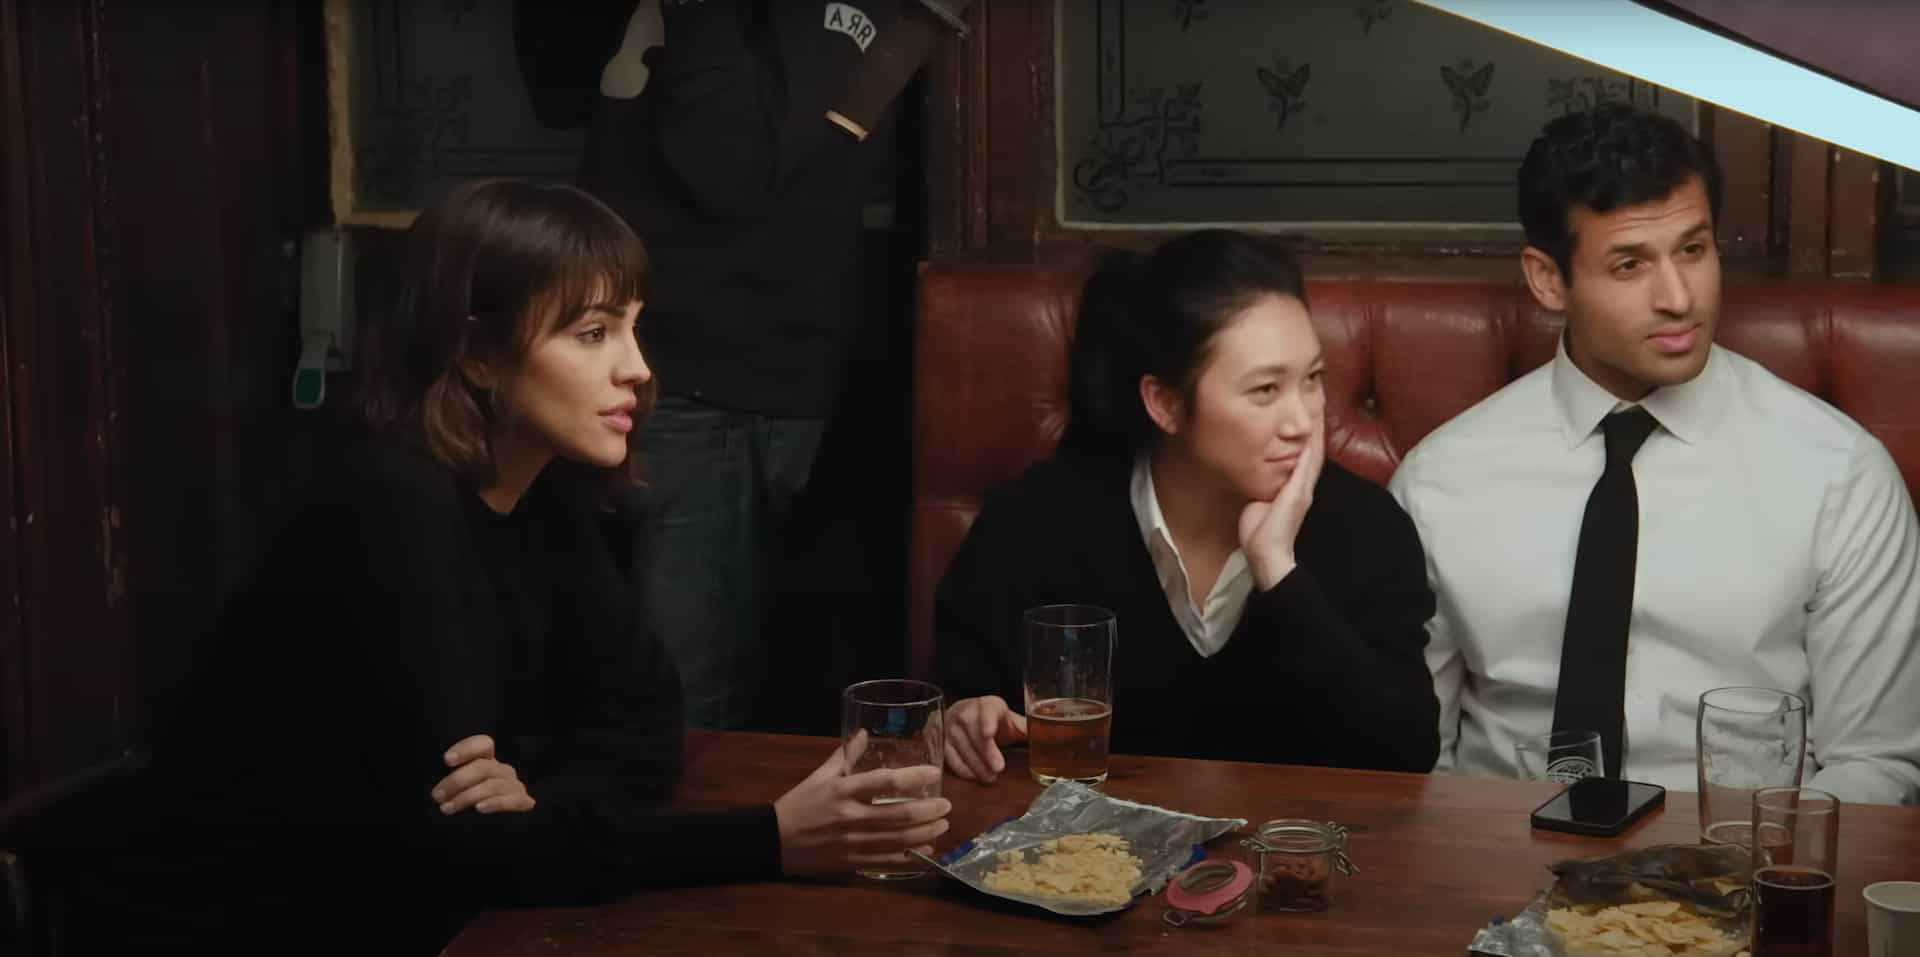 Three friends having drinks and appetizers at a bar